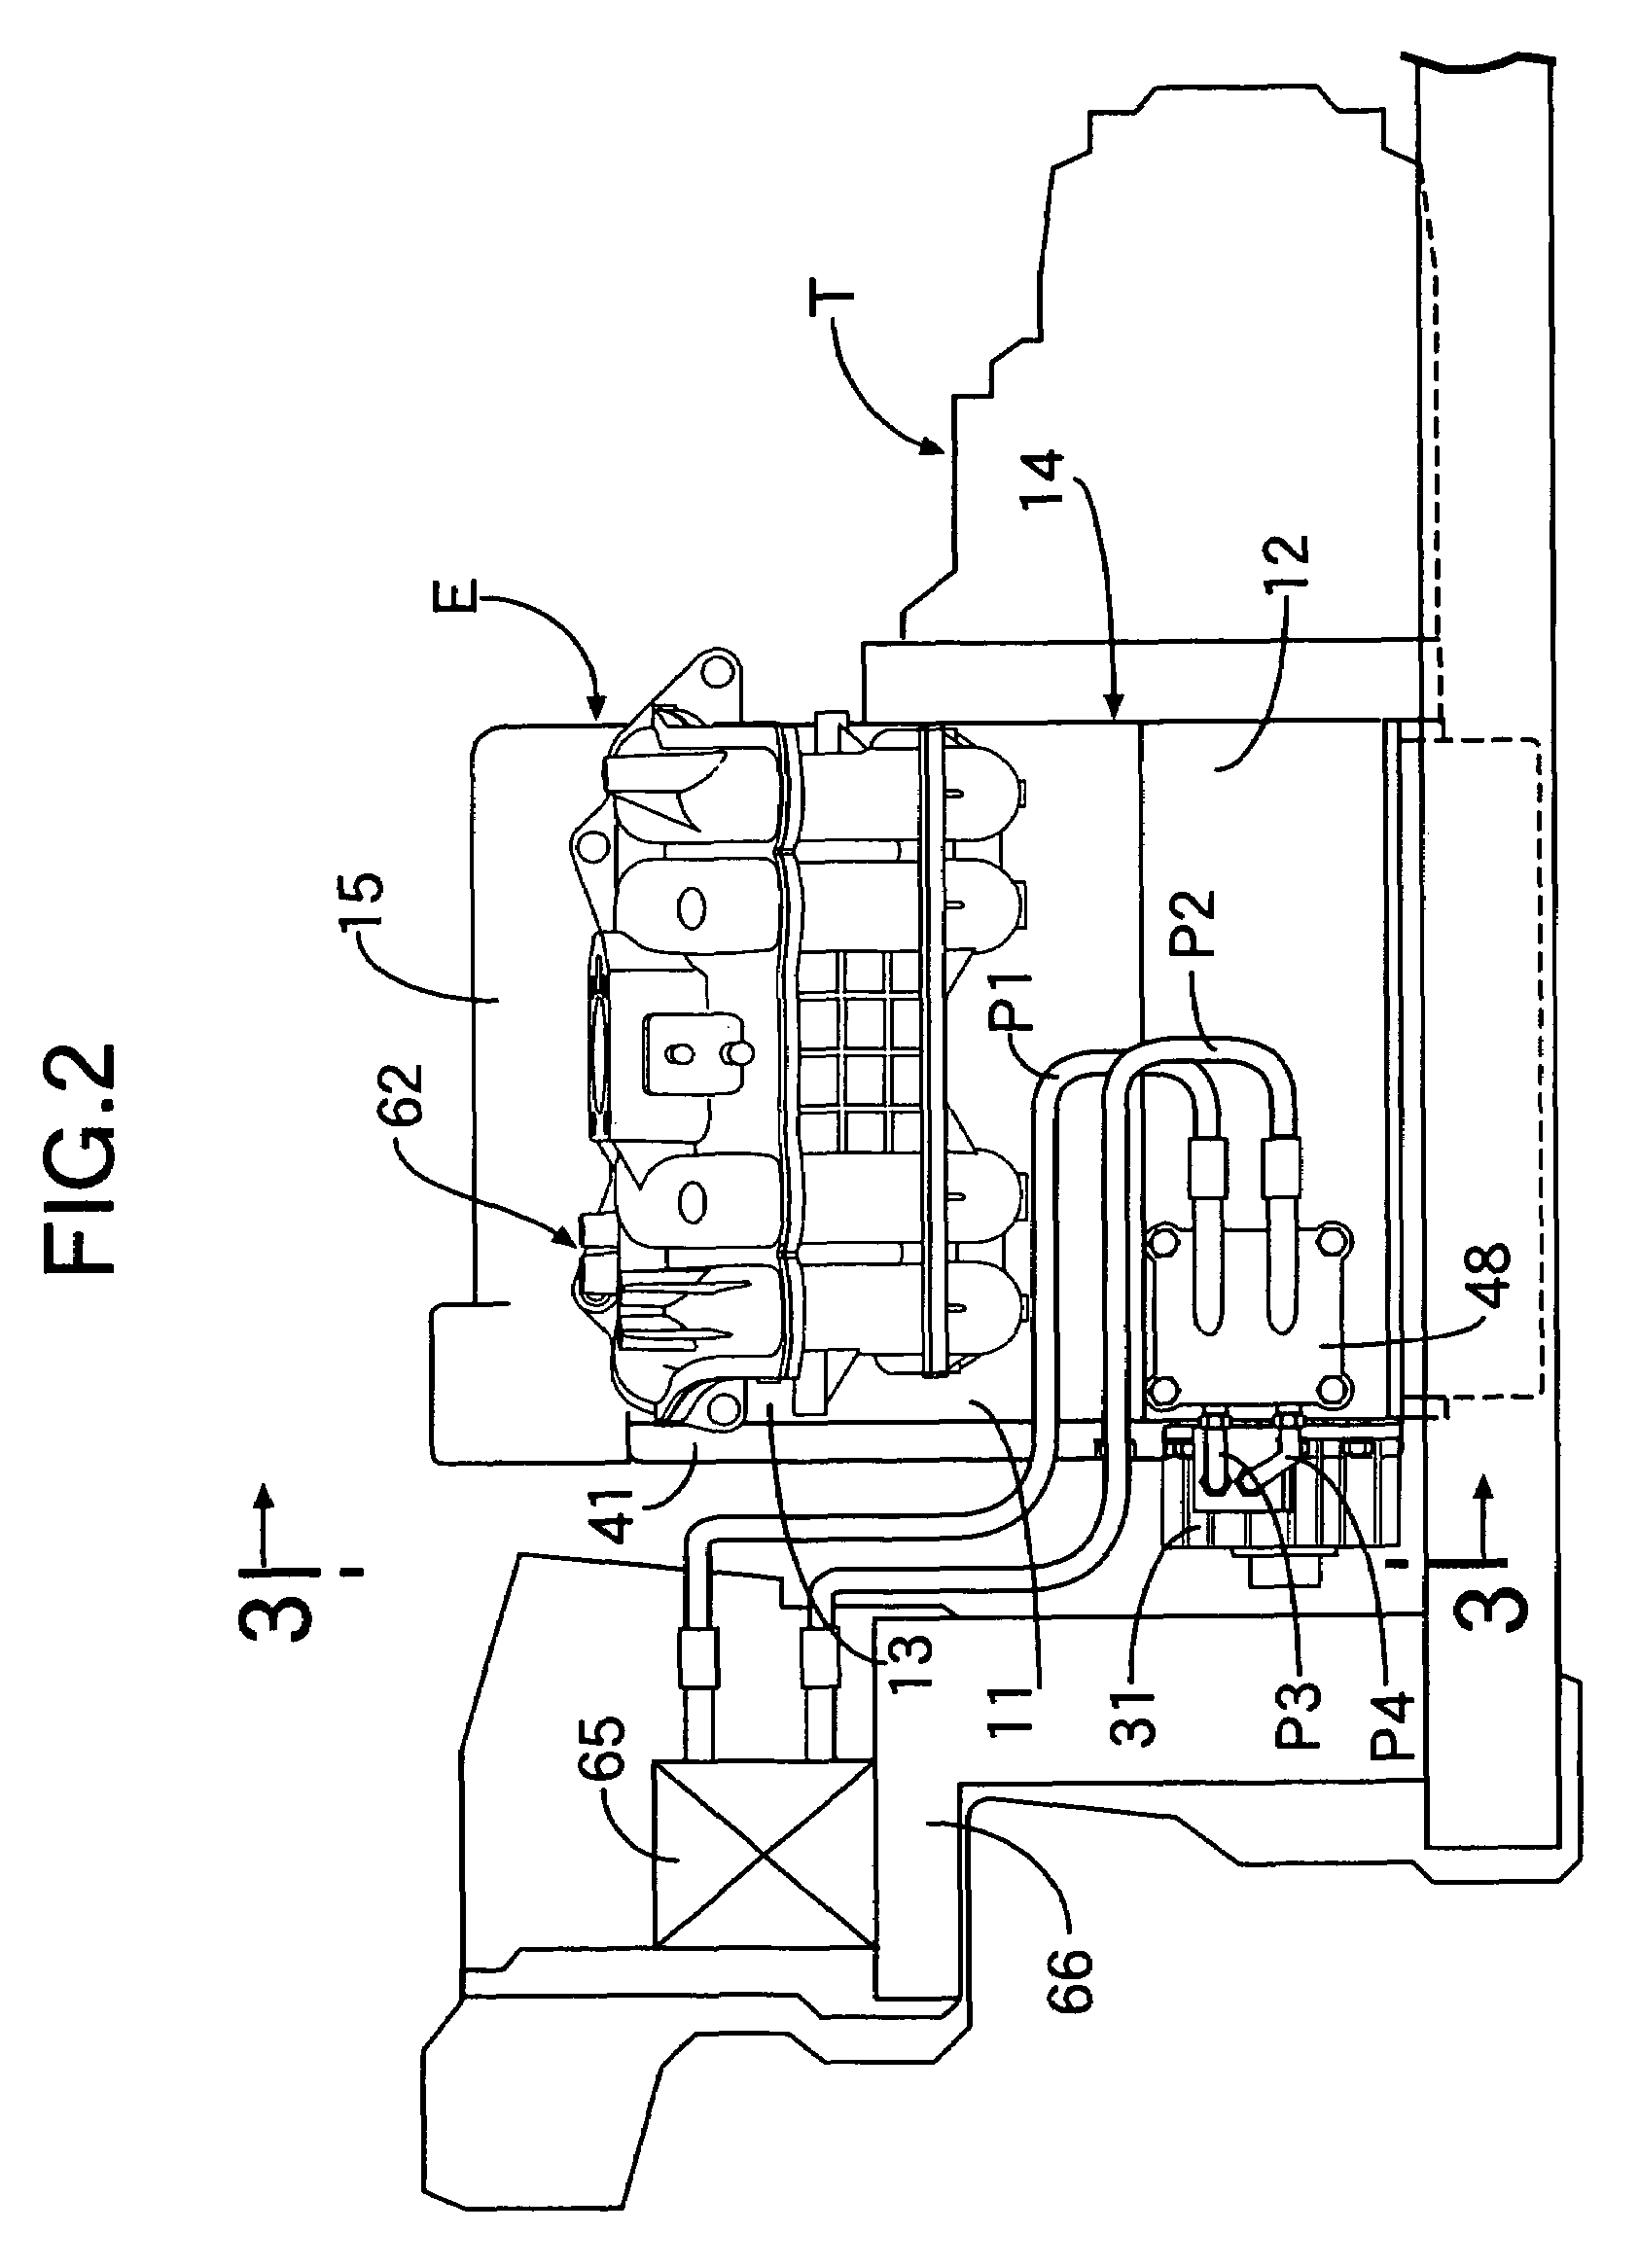 Variable stroke-characteristic engine for vehicle